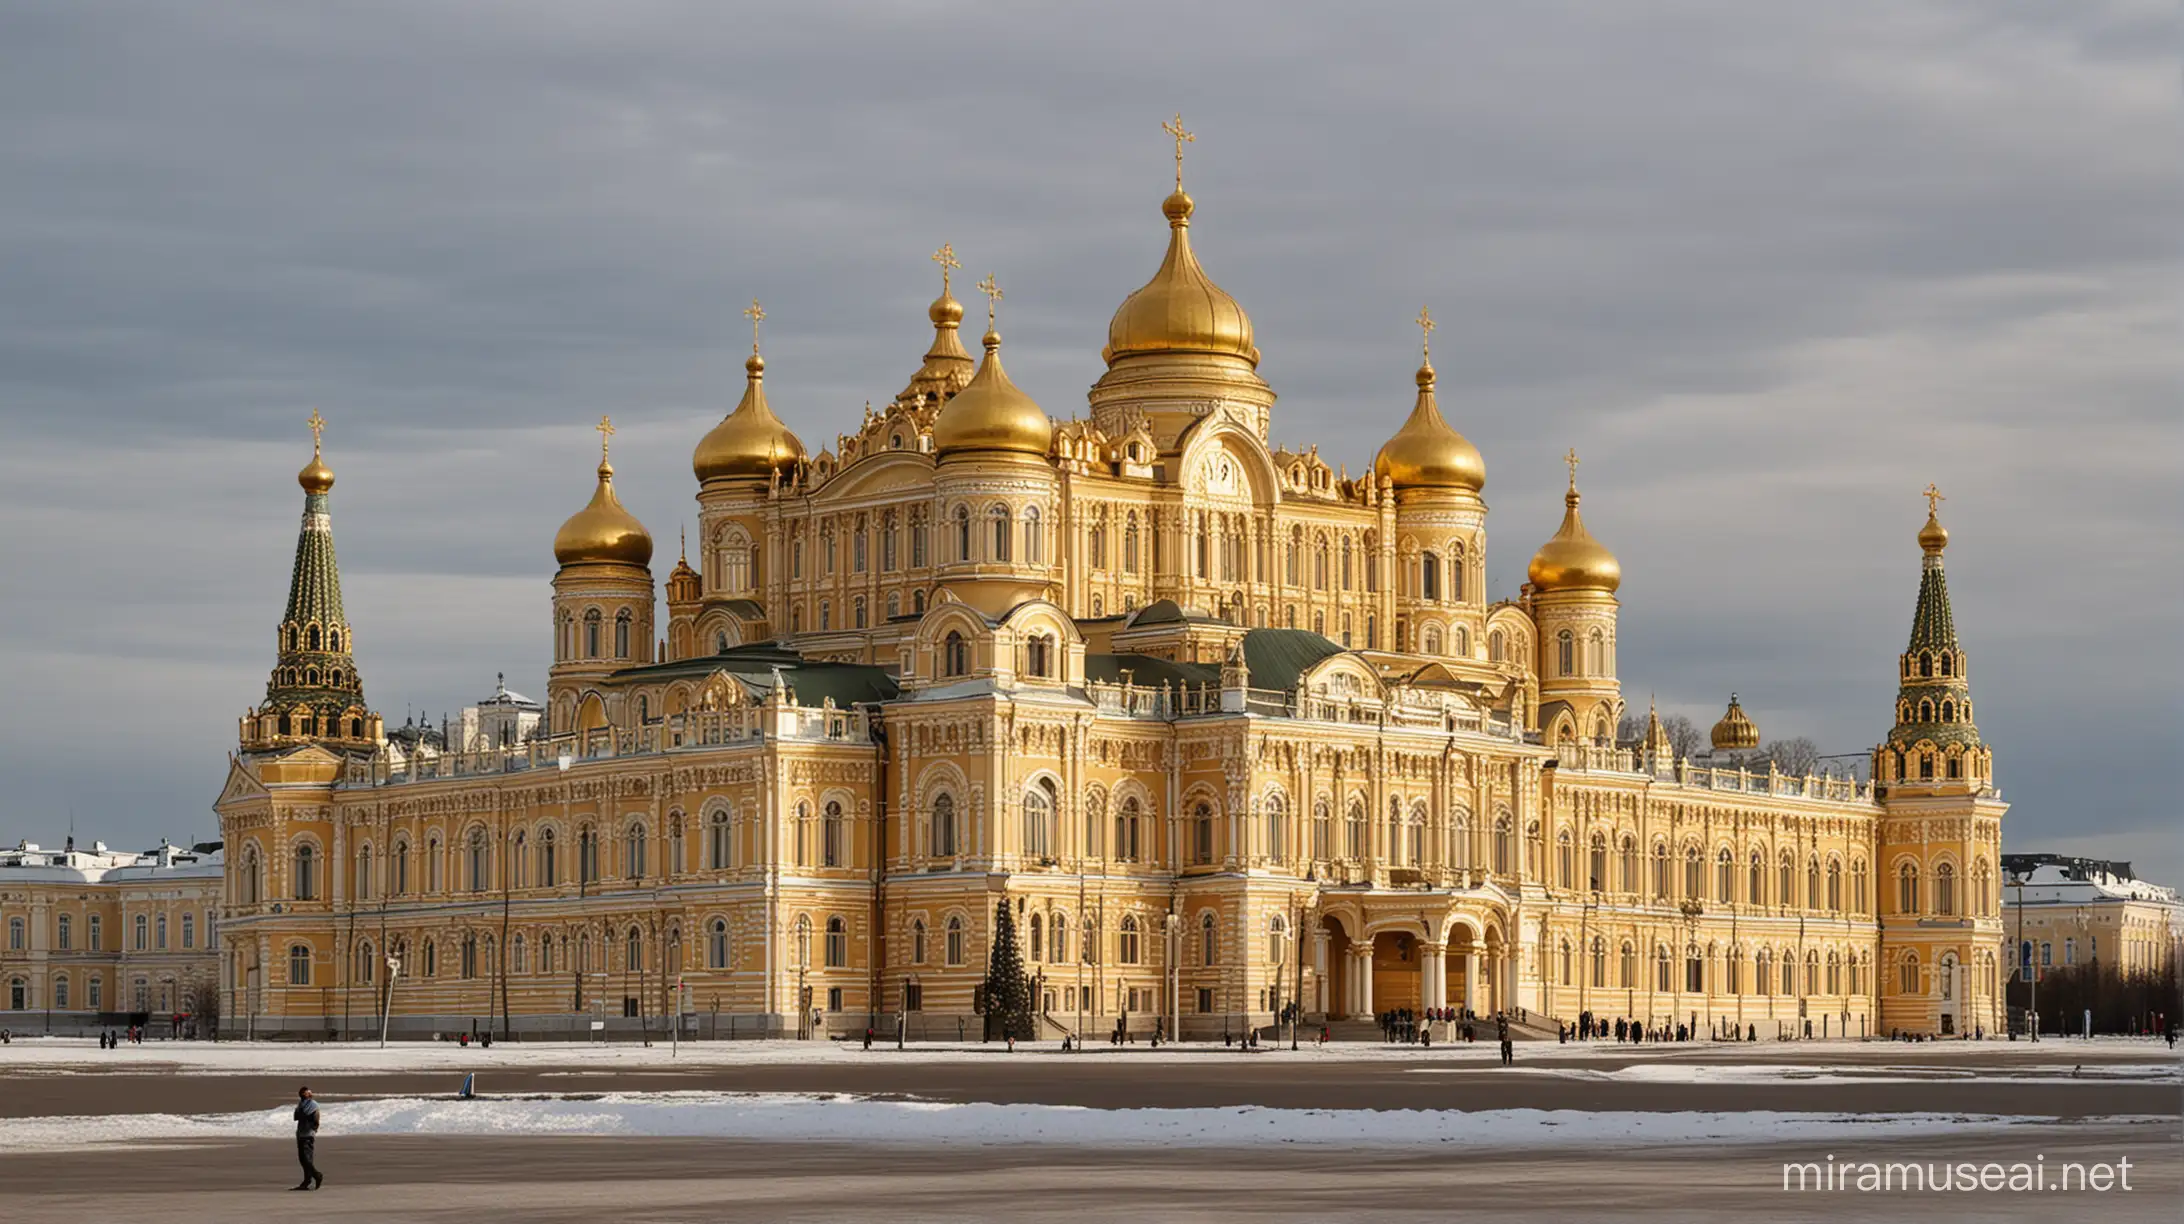 Glorious Golden Palace in Russia Majestic Architecture and Rich History